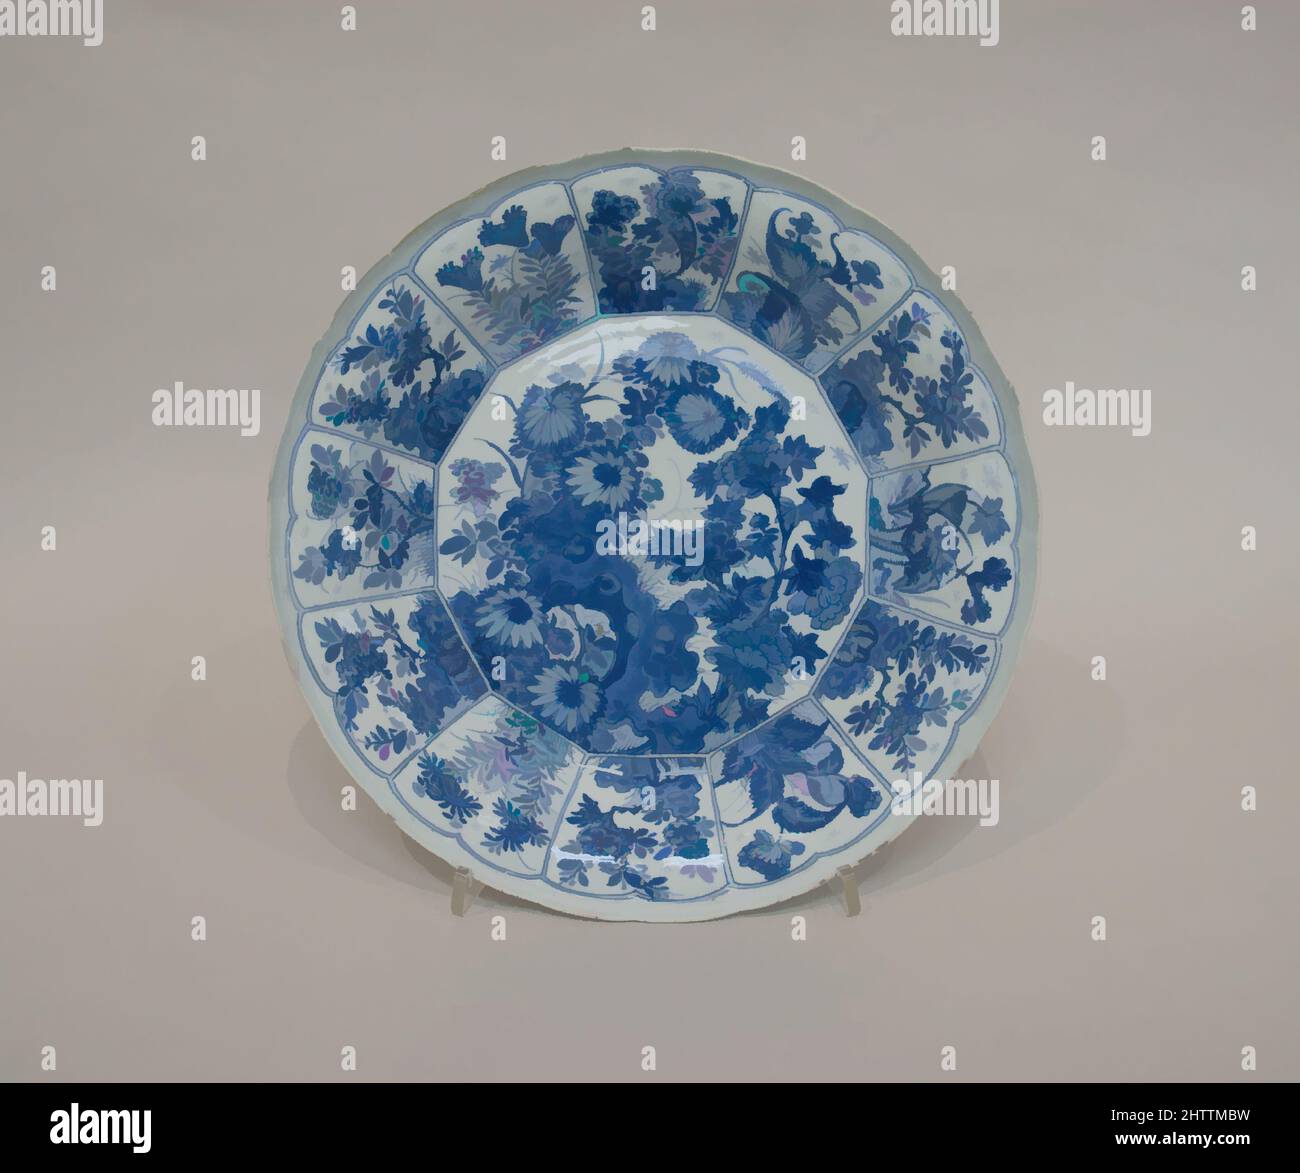 Art inspired by Dish, Qing dynasty (1644–1911), Kangxi period (1662–1722), China, Porcelain, H. 2 1/2 in. (6.4 cm); Diam. of rim: 14 3/8 in. (36.5 cm); Diam. of foot: 8 in. (20.3 cm), Ceramics, Classic works modernized by Artotop with a splash of modernity. Shapes, color and value, eye-catching visual impact on art. Emotions through freedom of artworks in a contemporary way. A timeless message pursuing a wildly creative new direction. Artists turning to the digital medium and creating the Artotop NFT Stock Photo